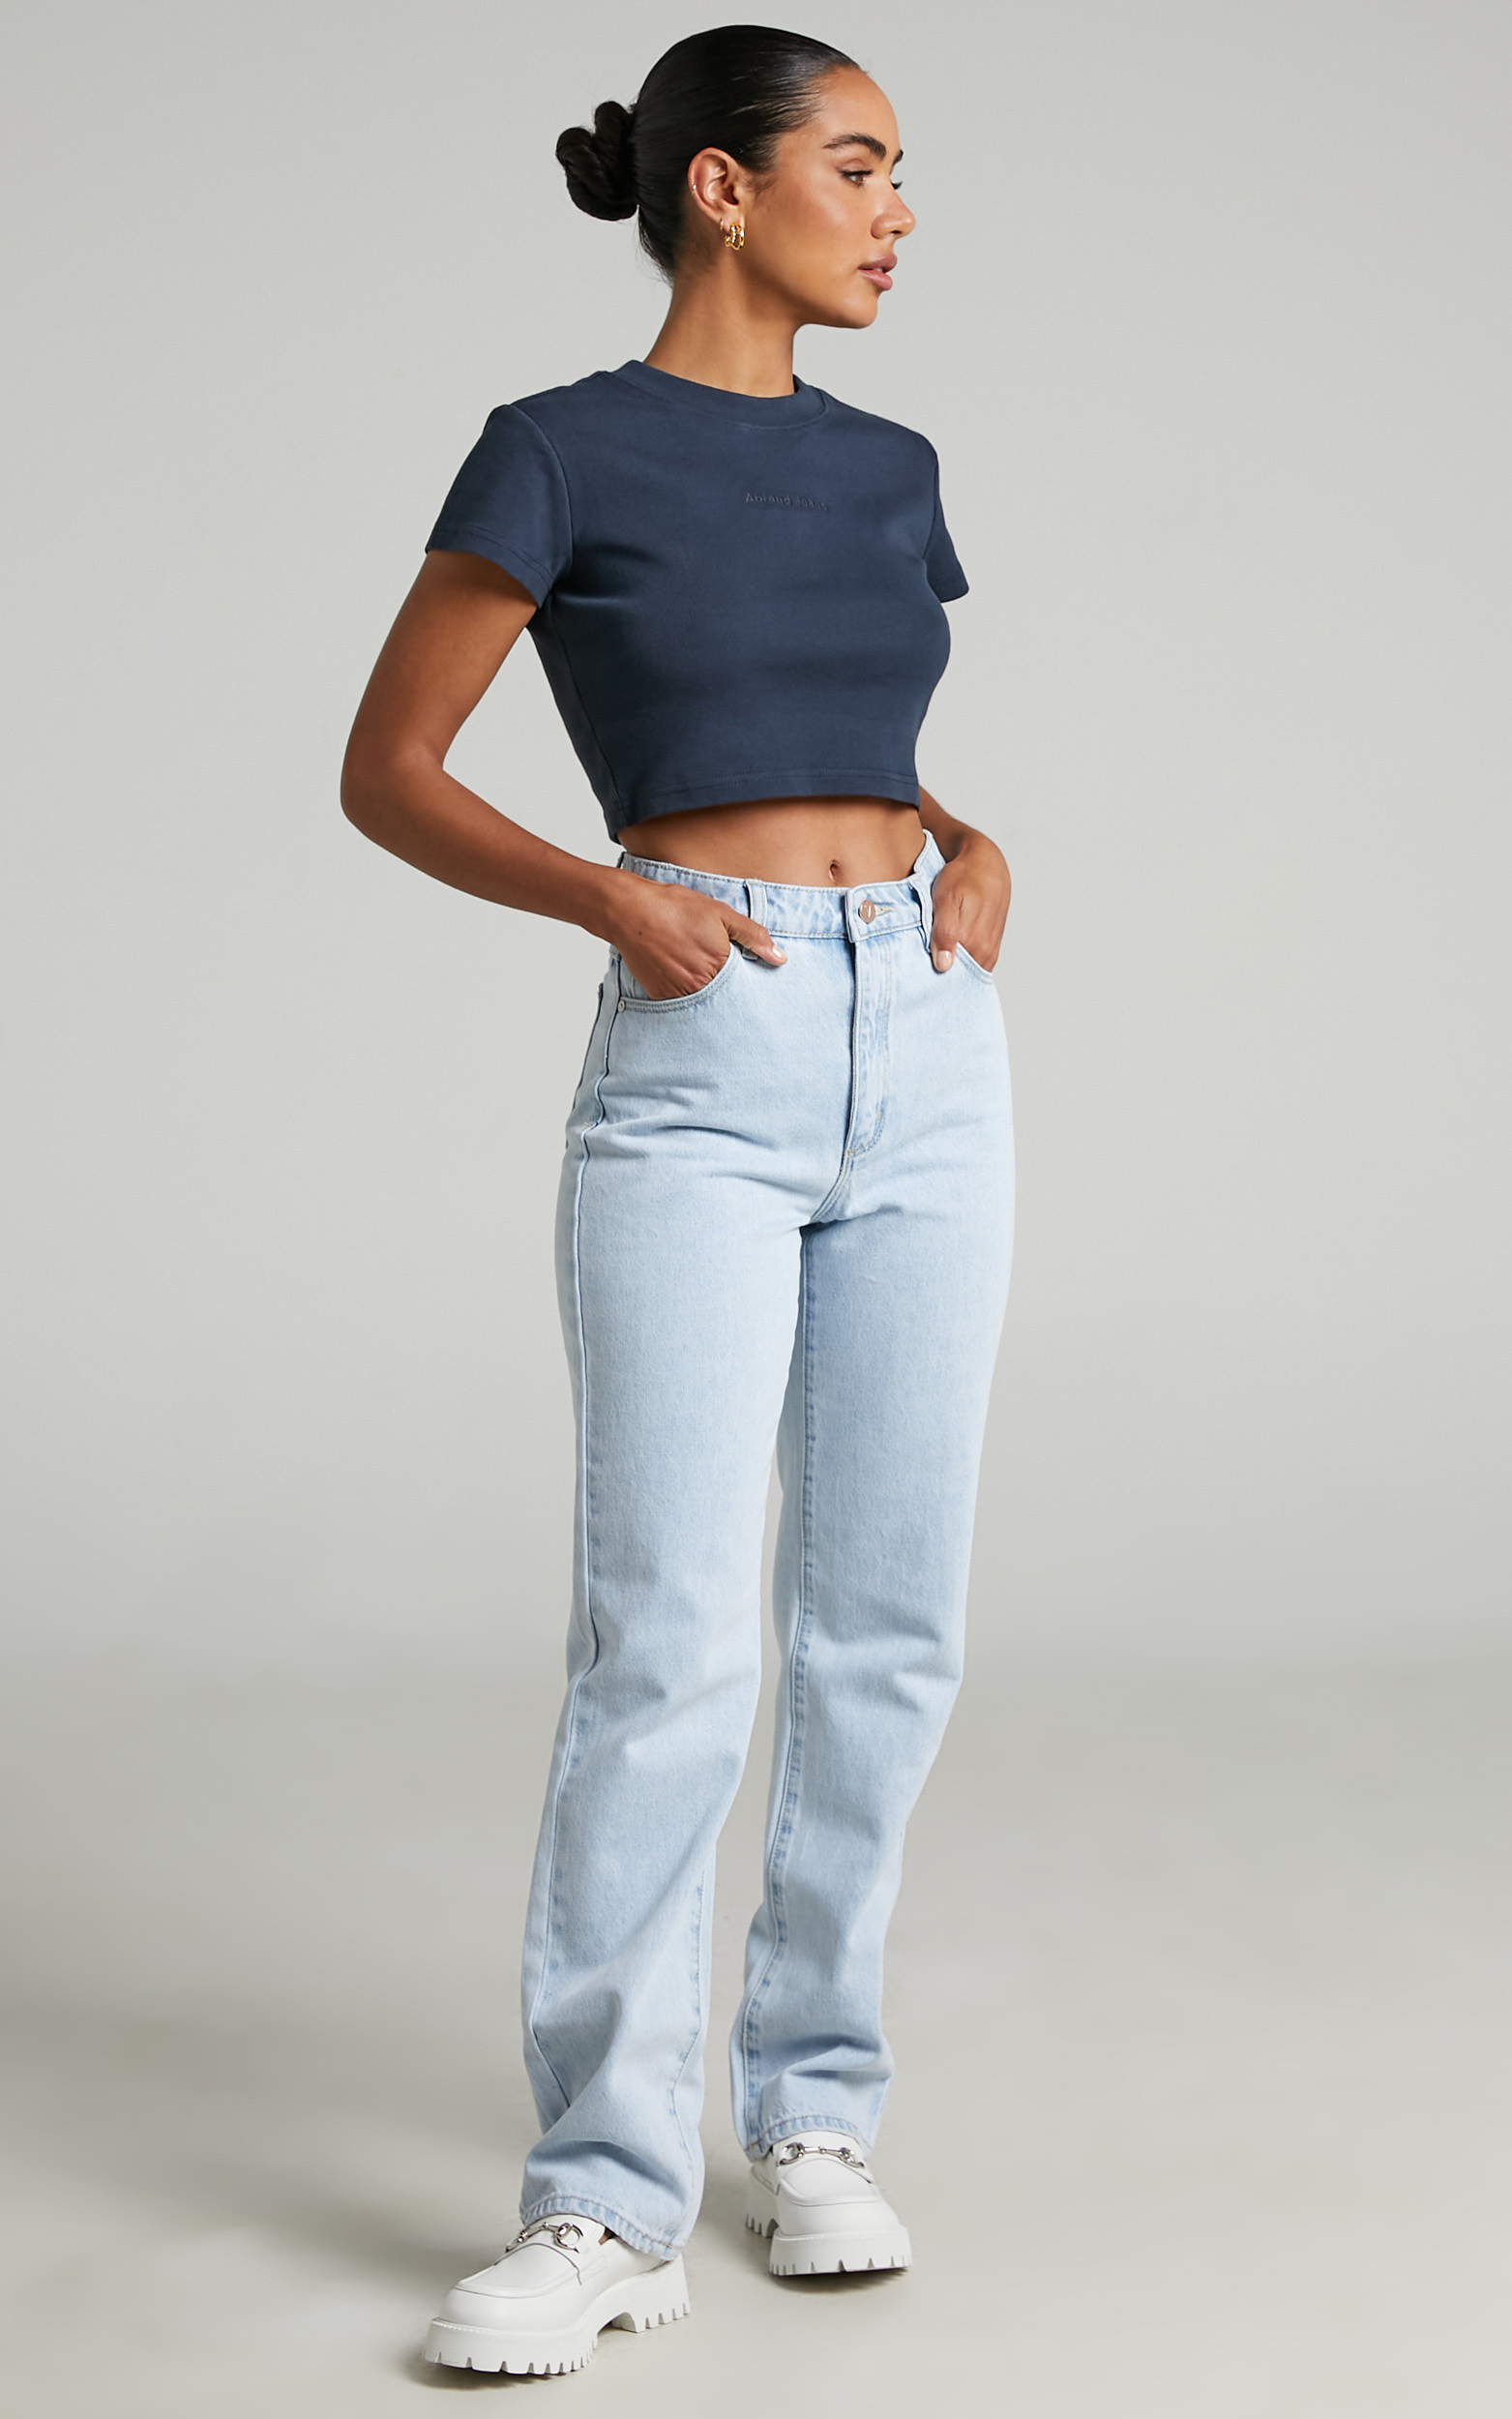 Abrand - 90's Crop Tee in 70s Navy - L, NVY1, hi-res image number null